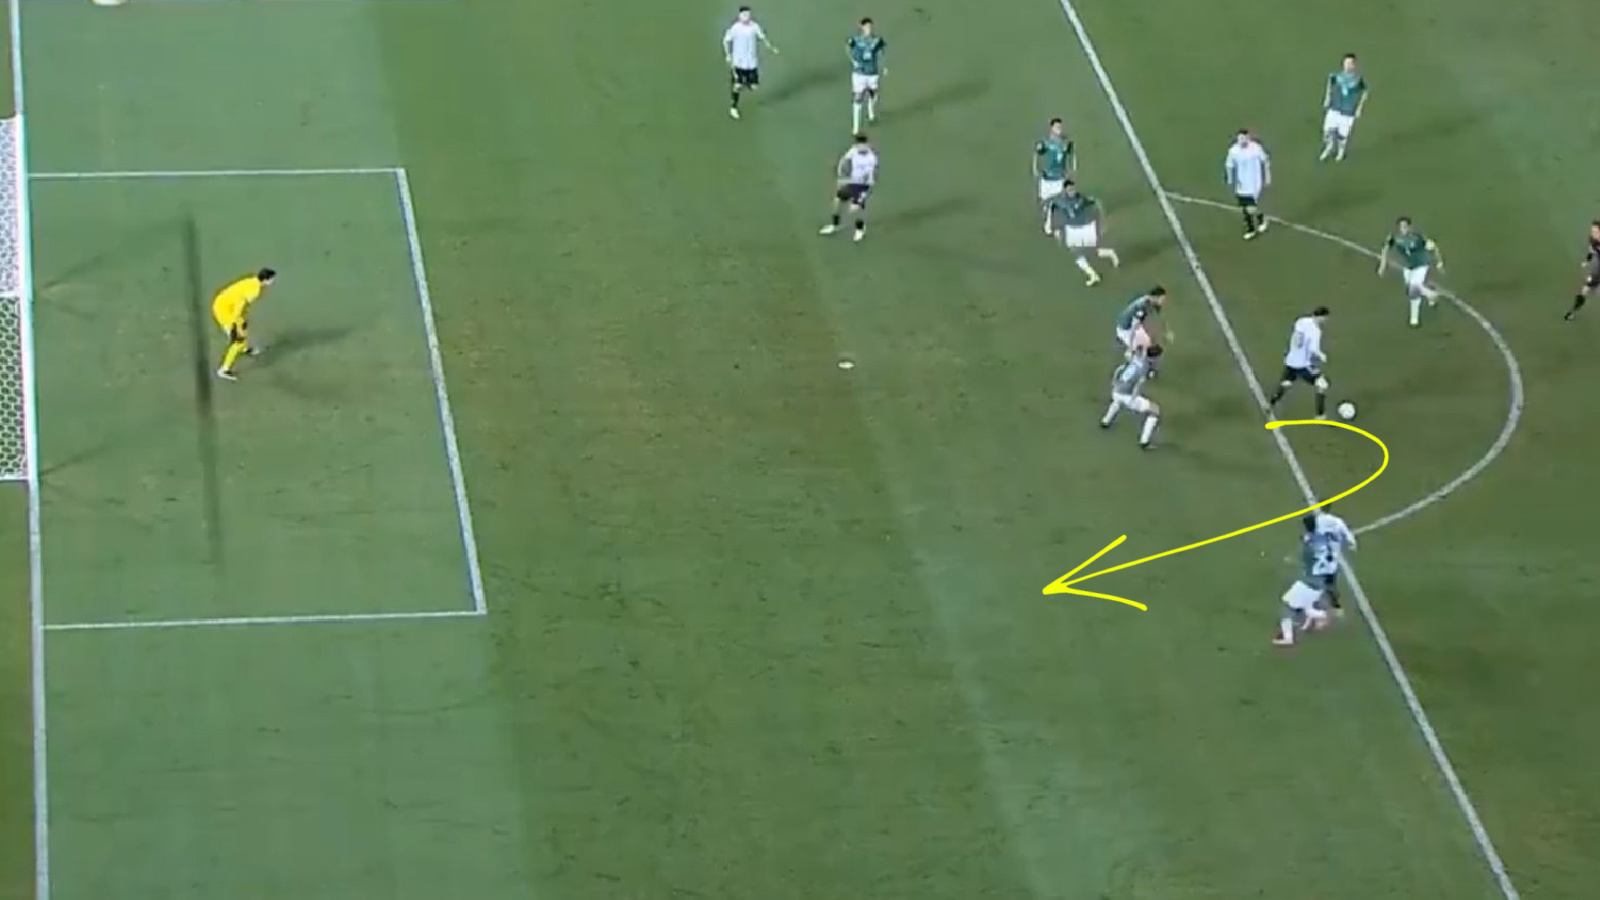 Lionel Messi with his back towards the two Bolivian defenders before making a pass in completely different direction